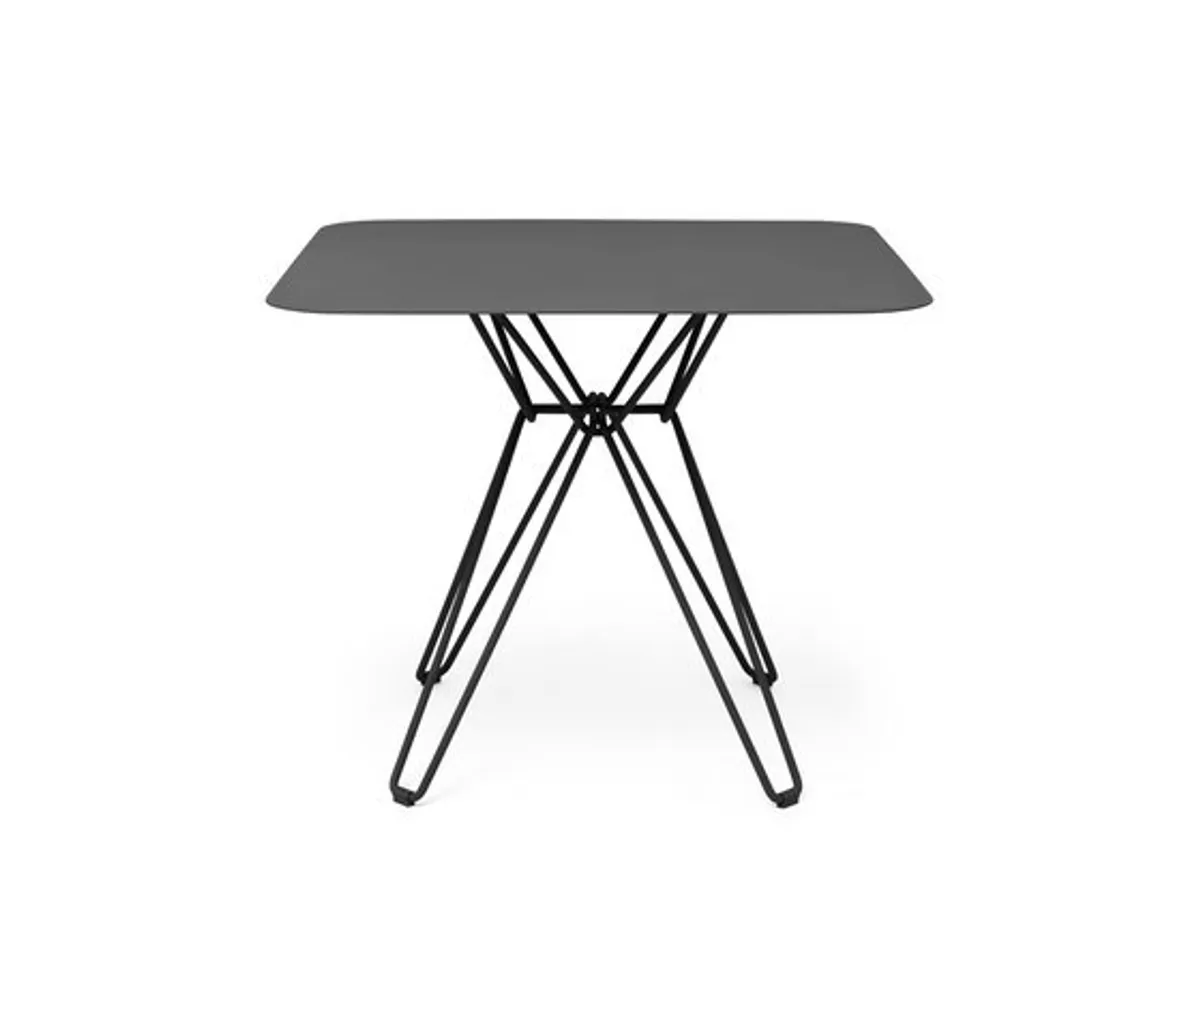 Tio Square Dining Table 01 Inside Out Contracts